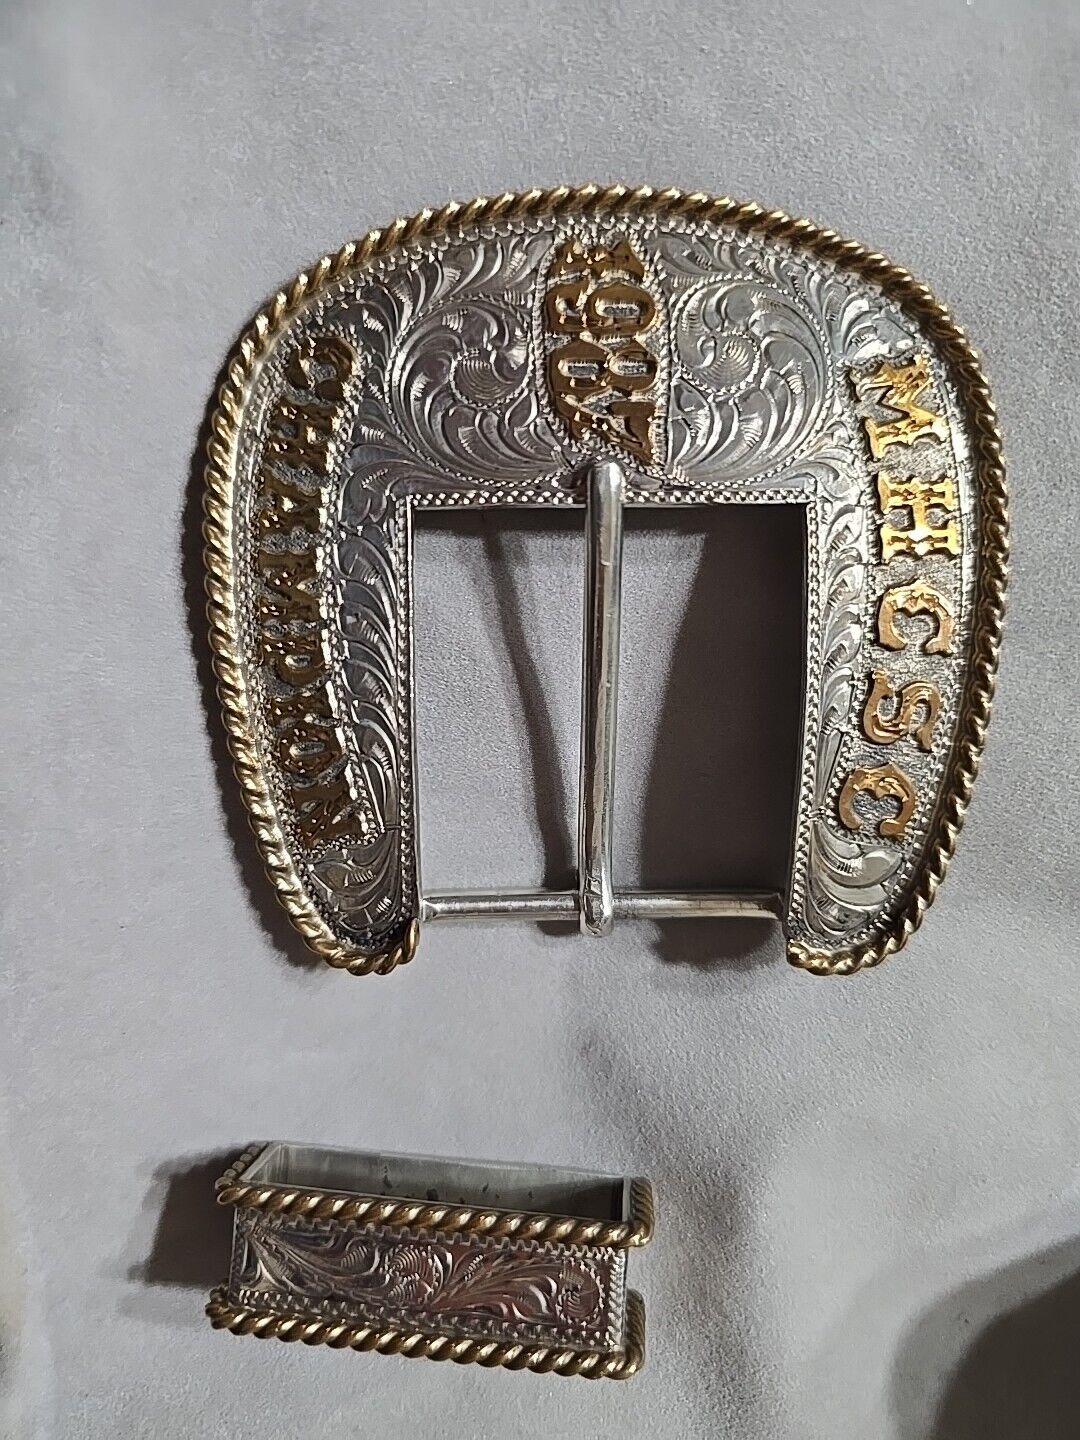 Rare Champion Trophy Buckle Rodeo Prca Bull Rider Pbr Team Roping Cutting Horse